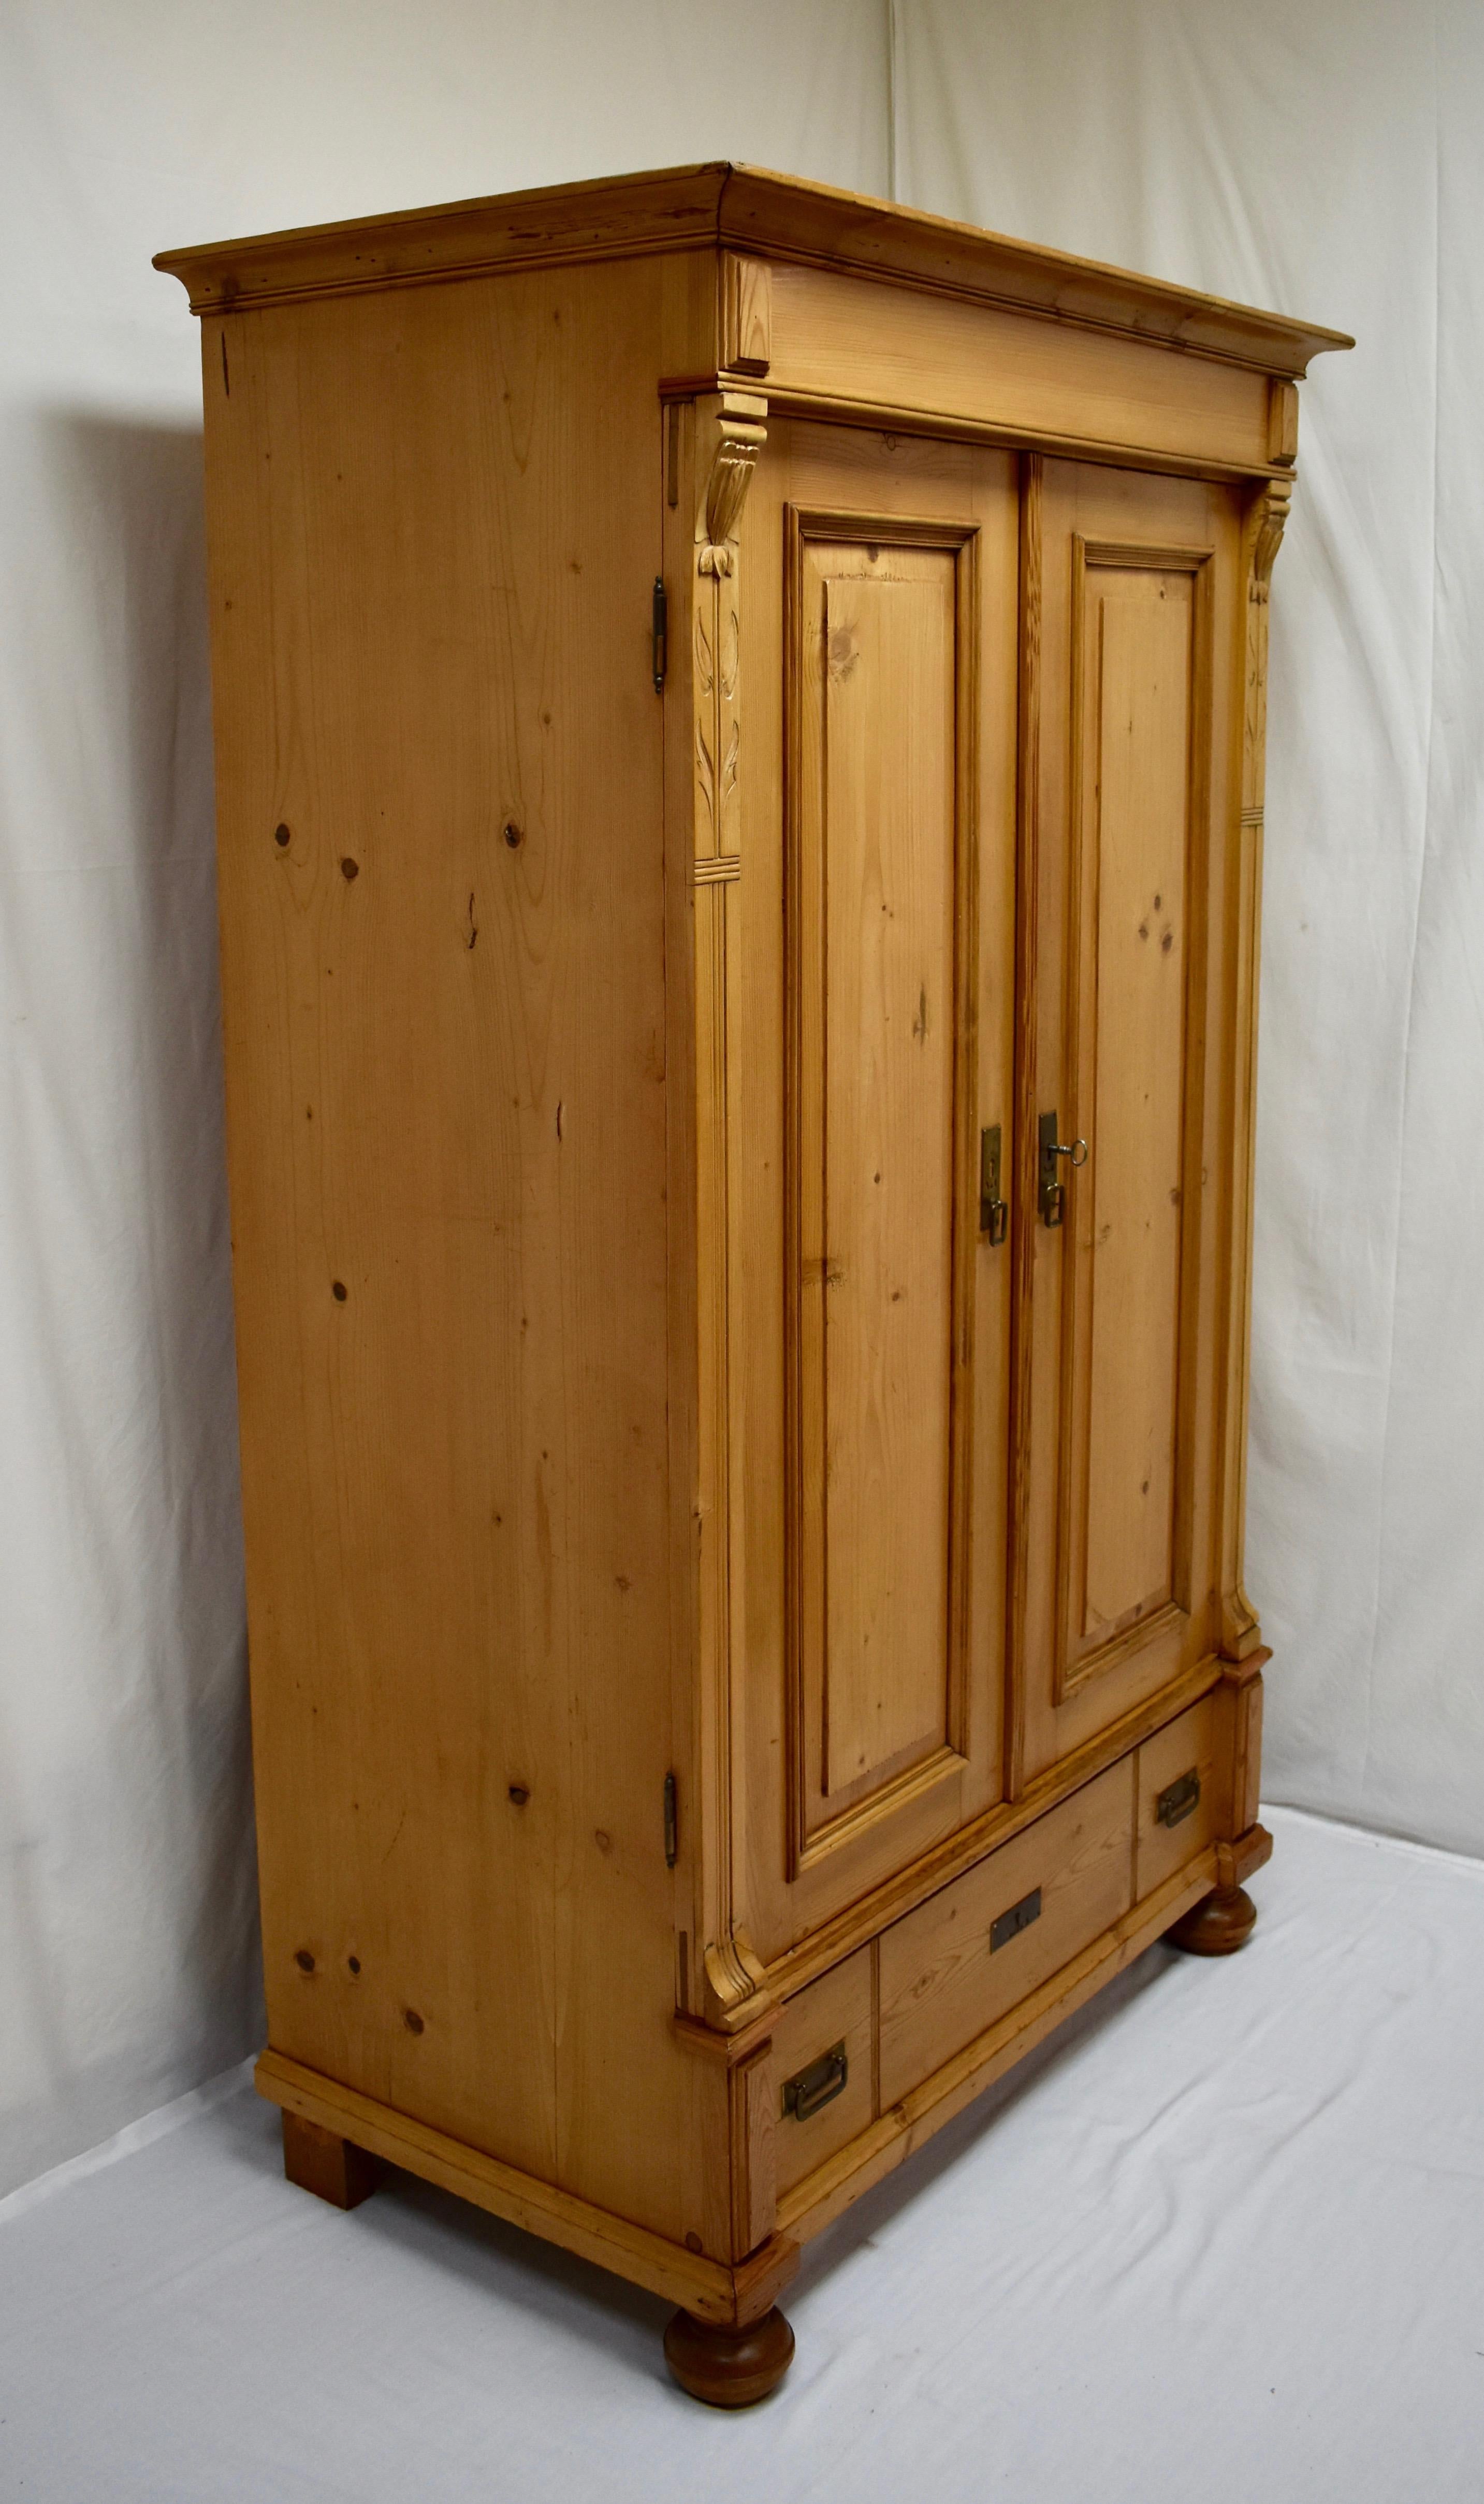 ANG01 Small Pine Two-Door Armoire 43.5x22x71H  Germany, circa 1910 $1795.00
This  lovely little armoire is as elegant as it is well-made.  Beneath a boldly-swept crown molding are two wide-swinging doors, each with a single raised panel, bordered by